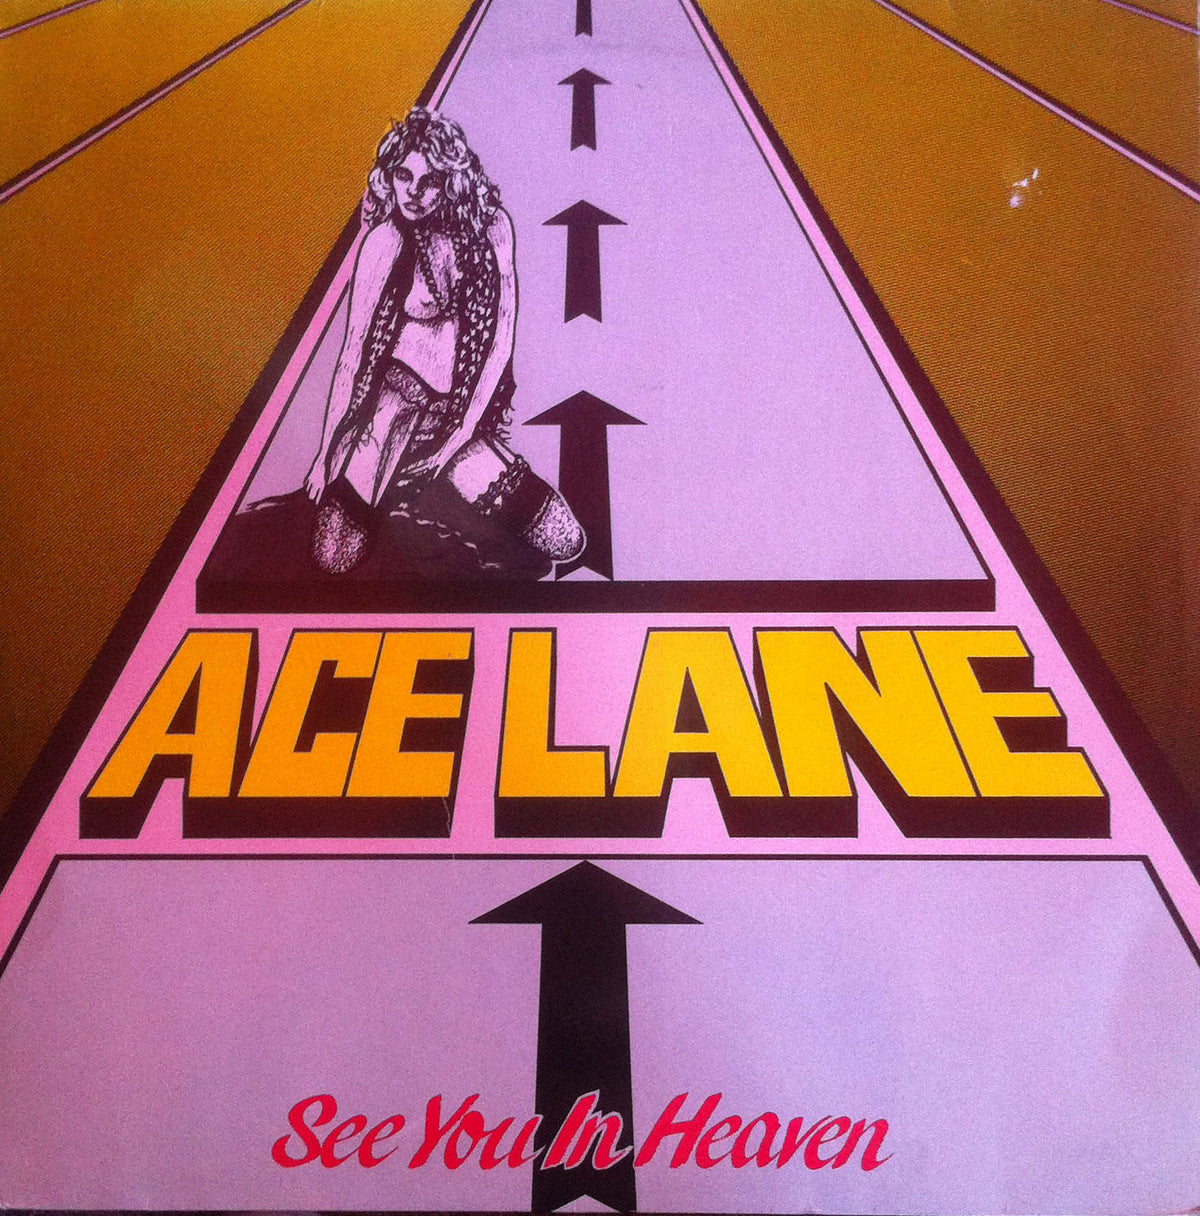 ACE LANE - See You In Heaven - 1